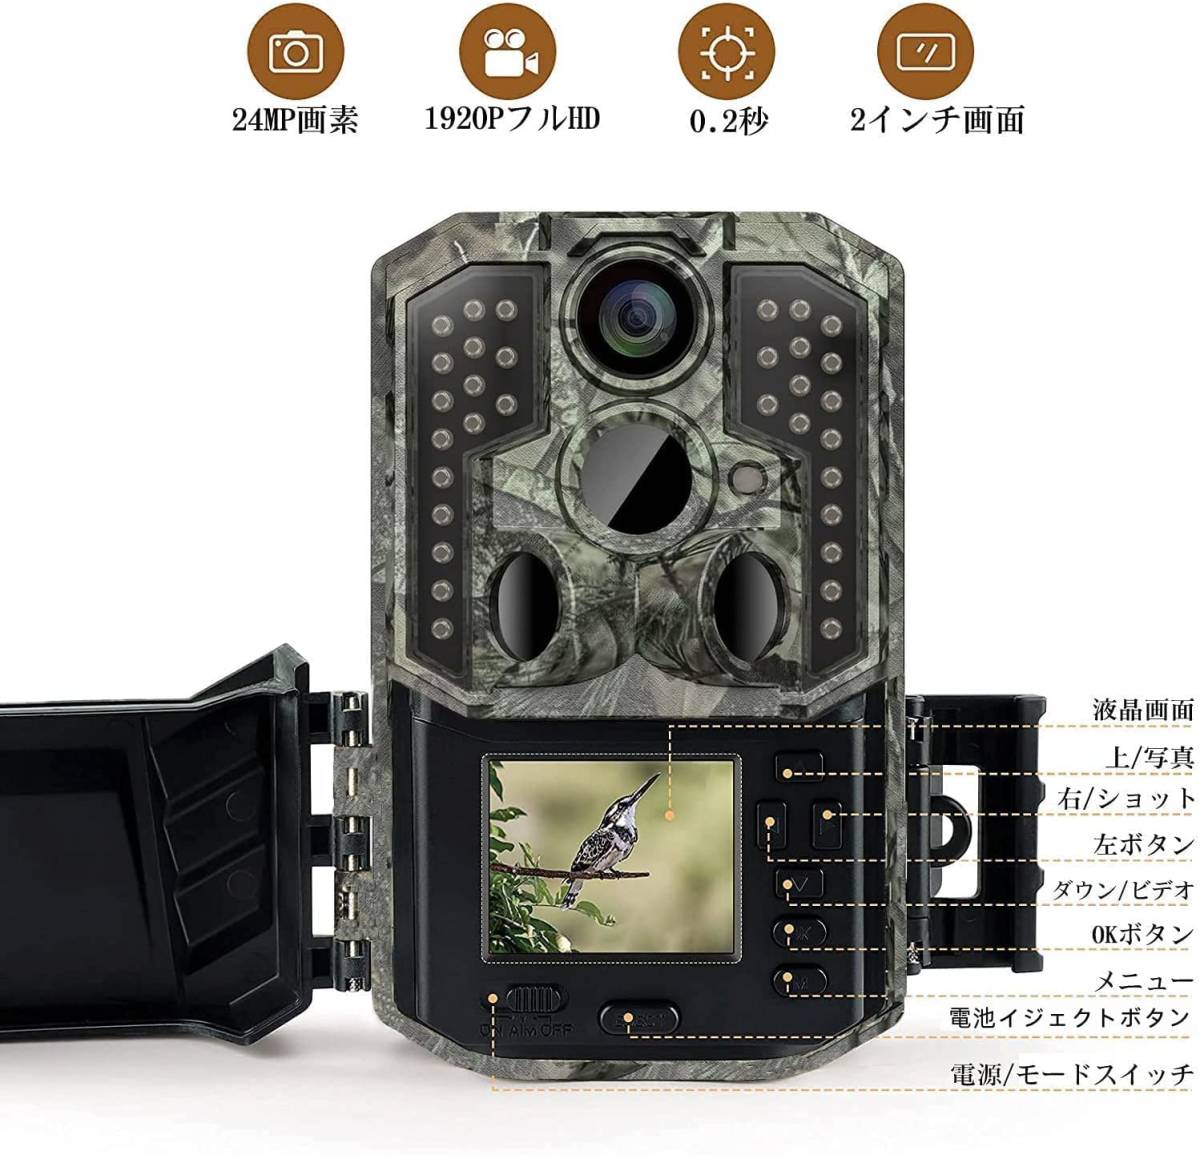 332 Trail camera battery type security camera infra-red rays camera 1920P full HD 3000 ten thousand pixels IP66 class waterproof dustproof 32GB memory card attaching 0.2s super high speed trigger 